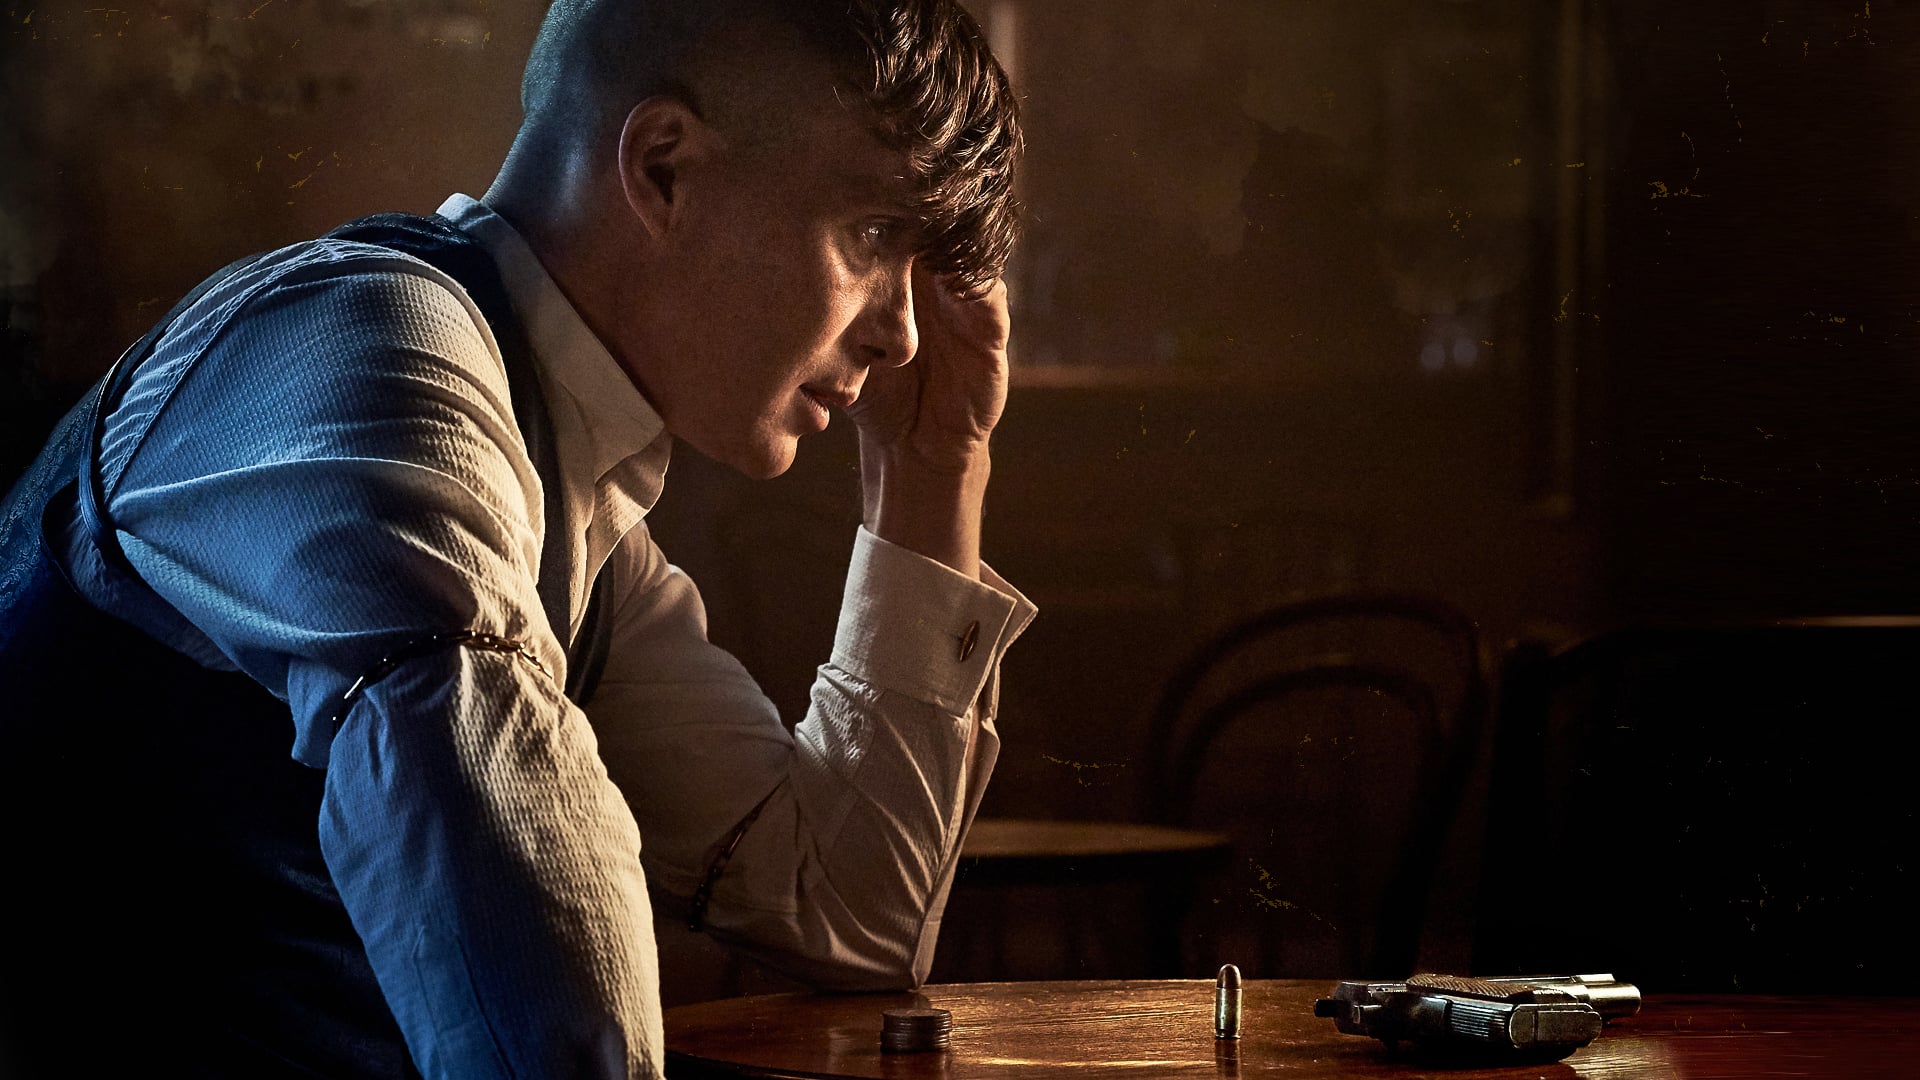 Tommy Shelby Peaky Blinders   1920x1080 Wallpaper   teahubio 1920x1080